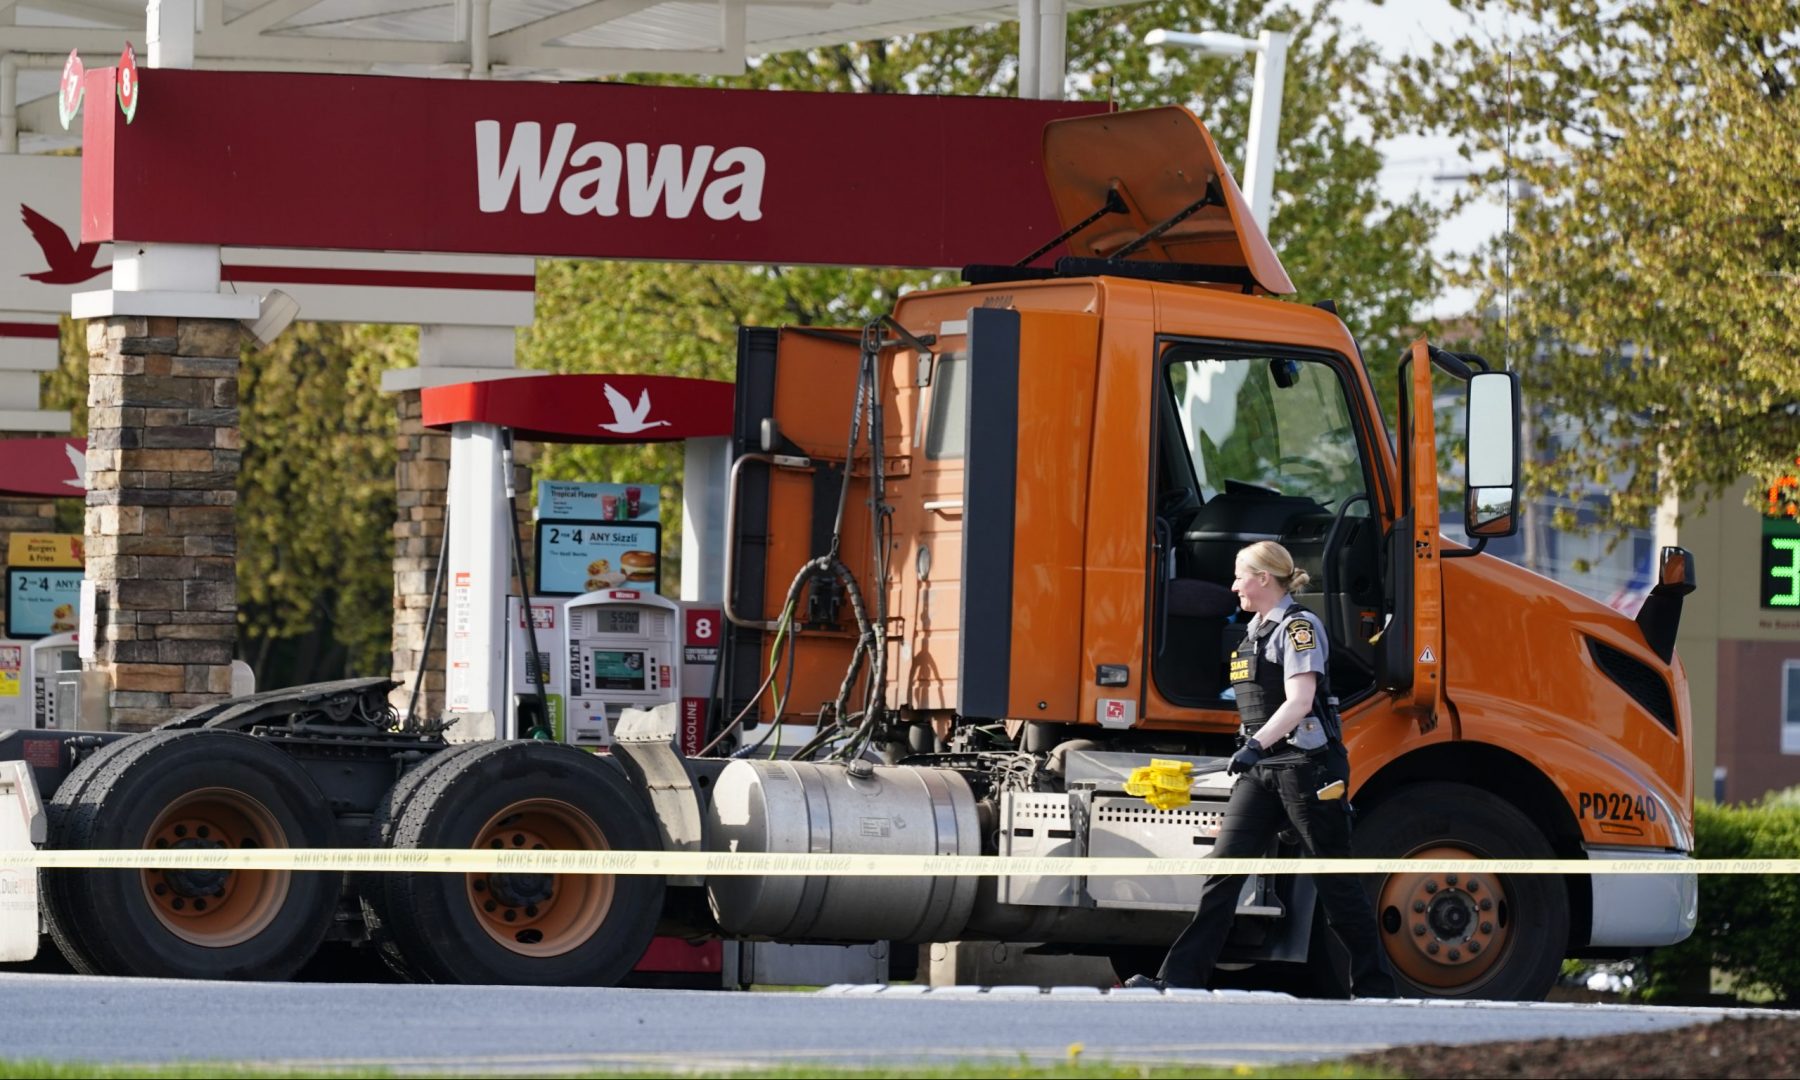 An investigator works the crime scene at a Wawa convenience store and gas station in Breinigsville, Pa., Wednesday, April 21, 2021. Police on Wednesday converged on a convenience store in eastern Pennsylvania following what state police called a 